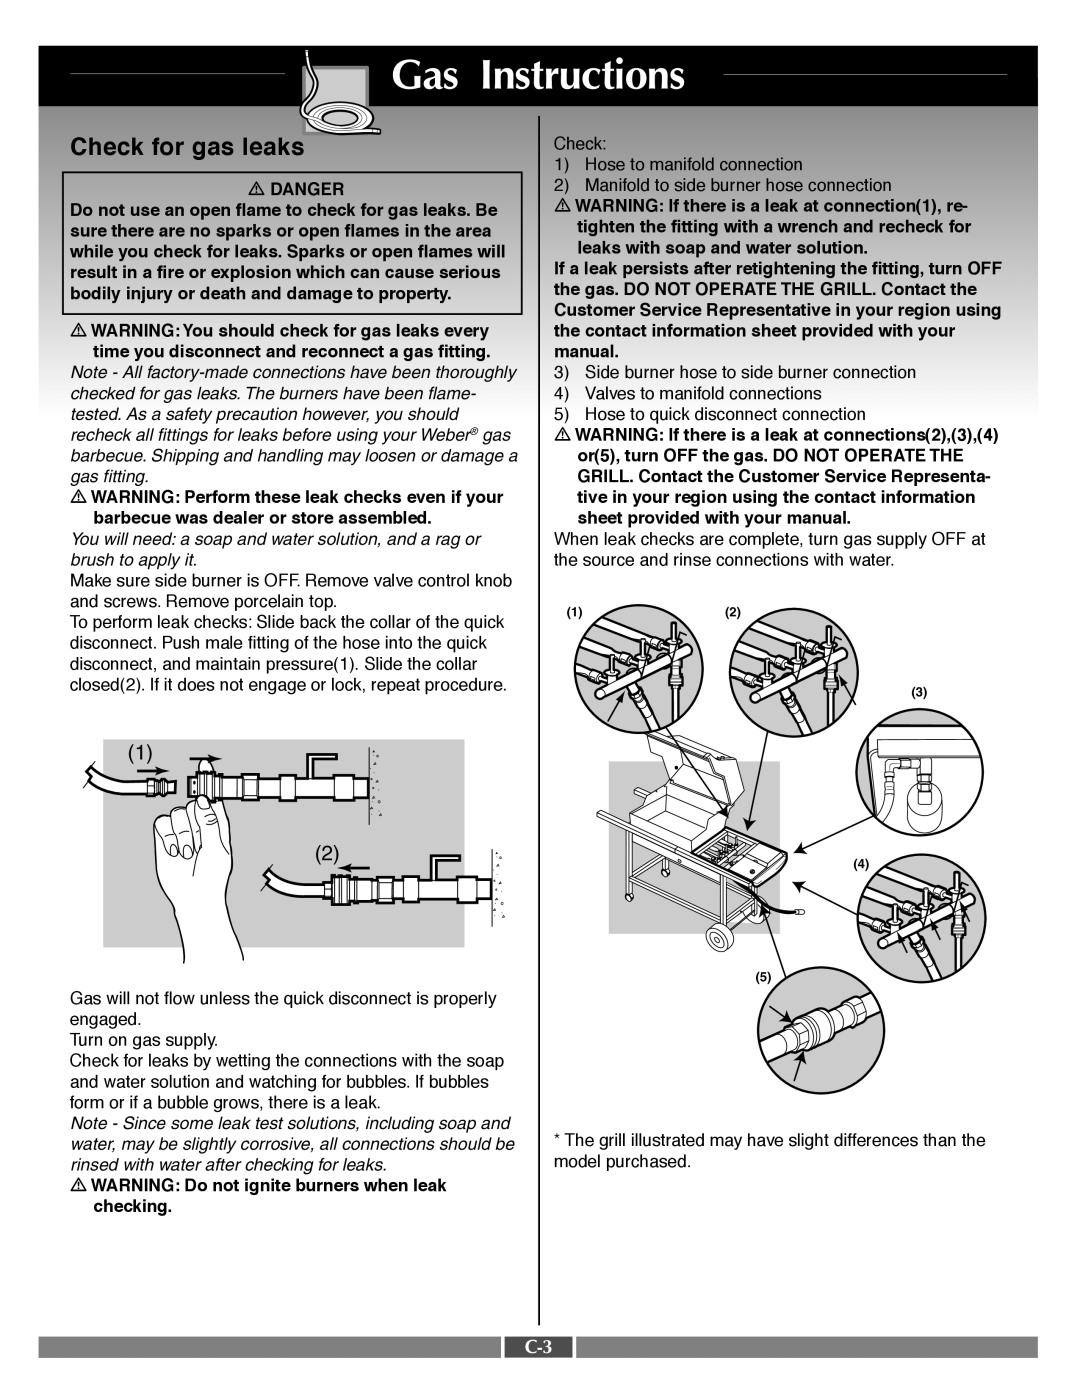 Weber 55556 manual Check for gas leaks, Gas Instructions 